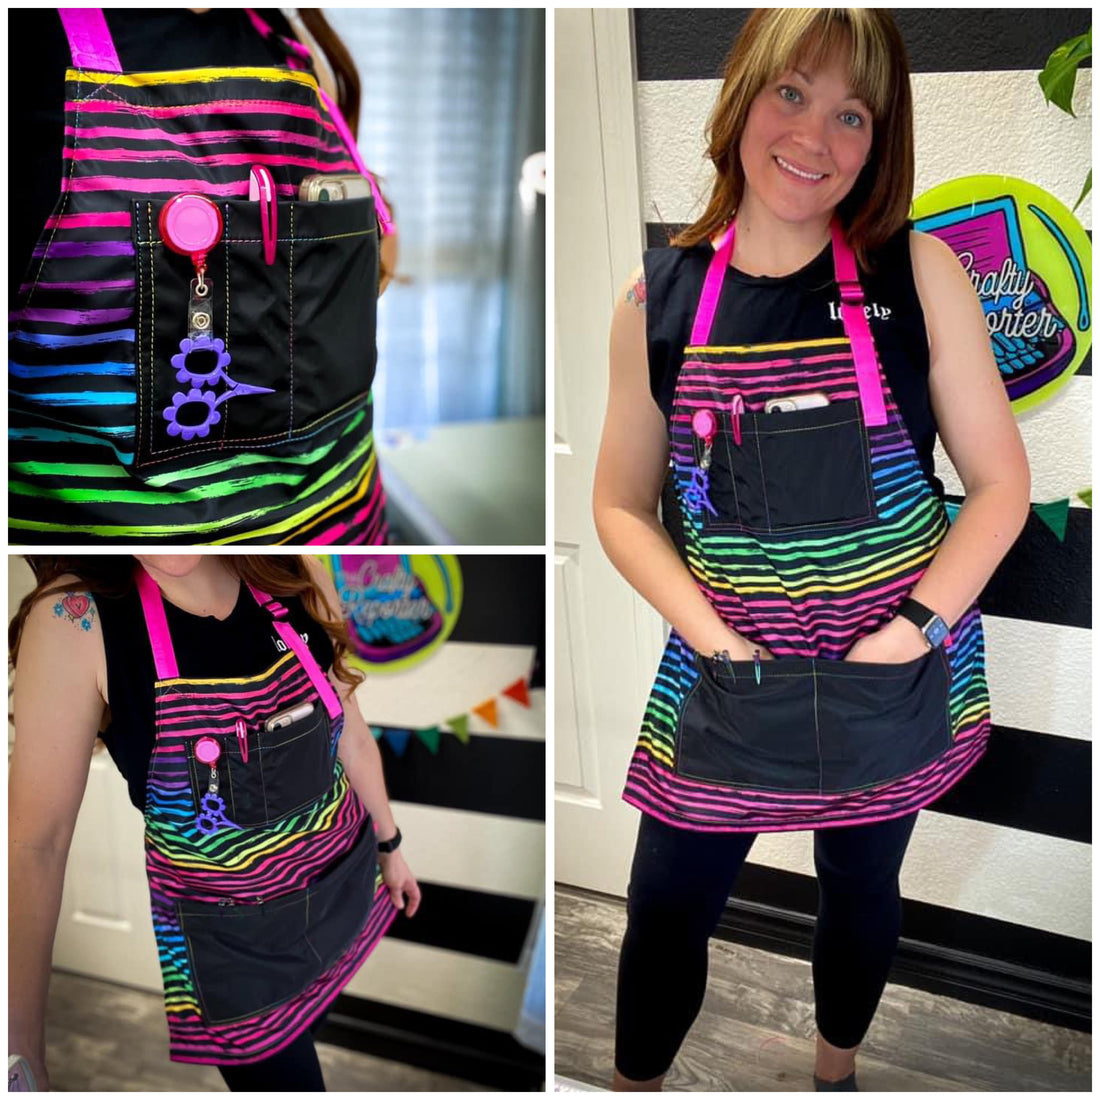 Aaron Apron PDF Sewing Pattern (Includes an A0 File, Projector File, and Video!)